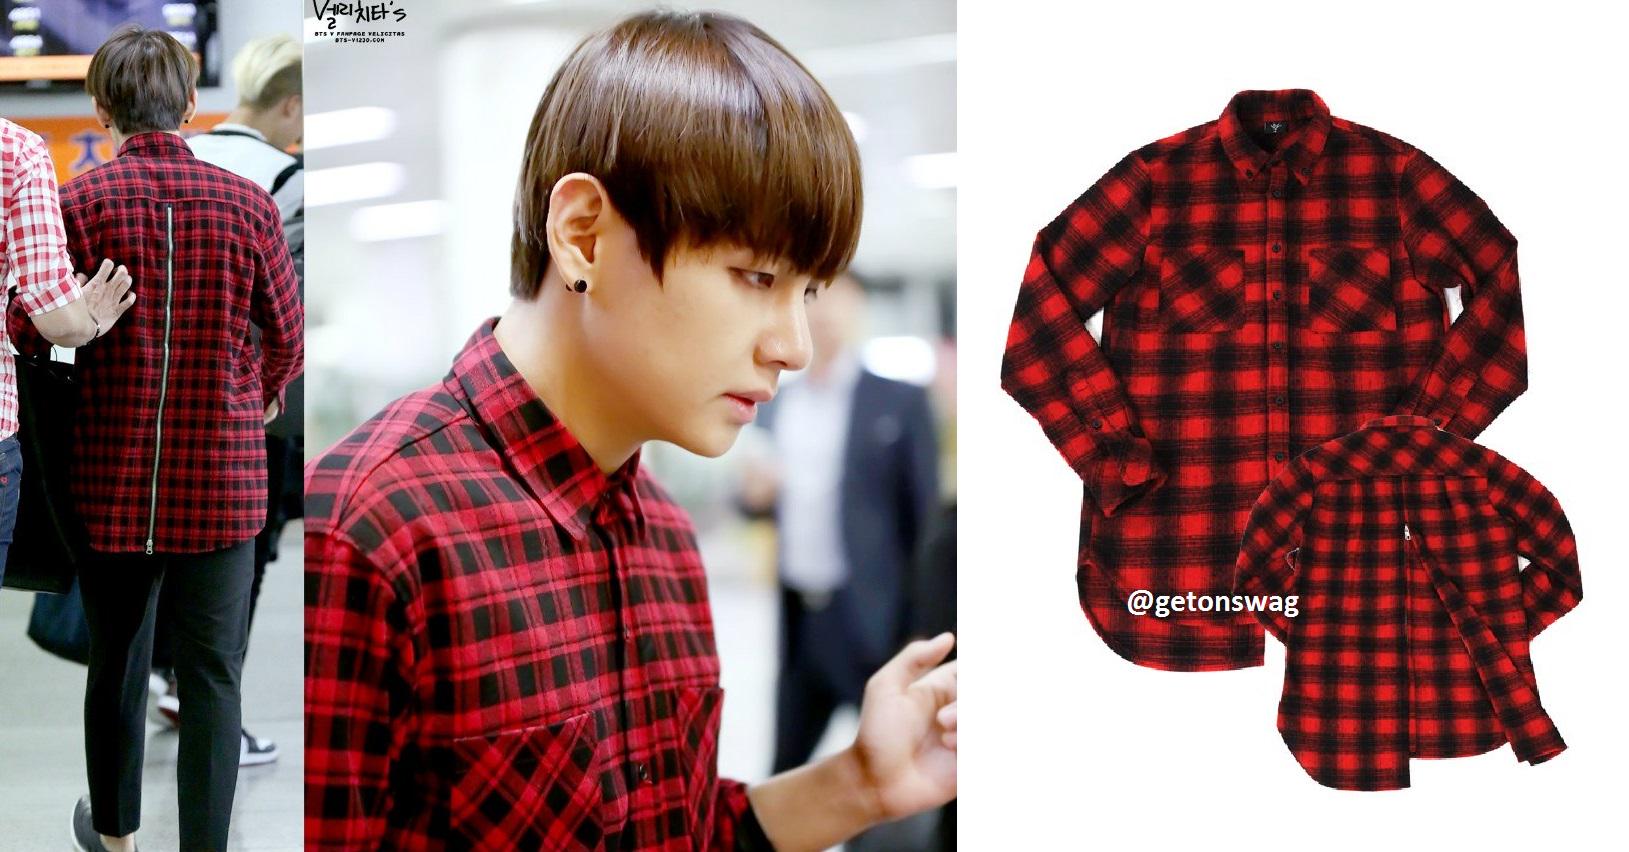 Beyond The Style ✼ Alex ✼ on Twitter: "#BTS #Bangtanboys #KimTaehyung (similar item) MONO'T zip check flannel shirt black&amp;red, $55 http://t.co/Fhz5ZOgDX2" / X